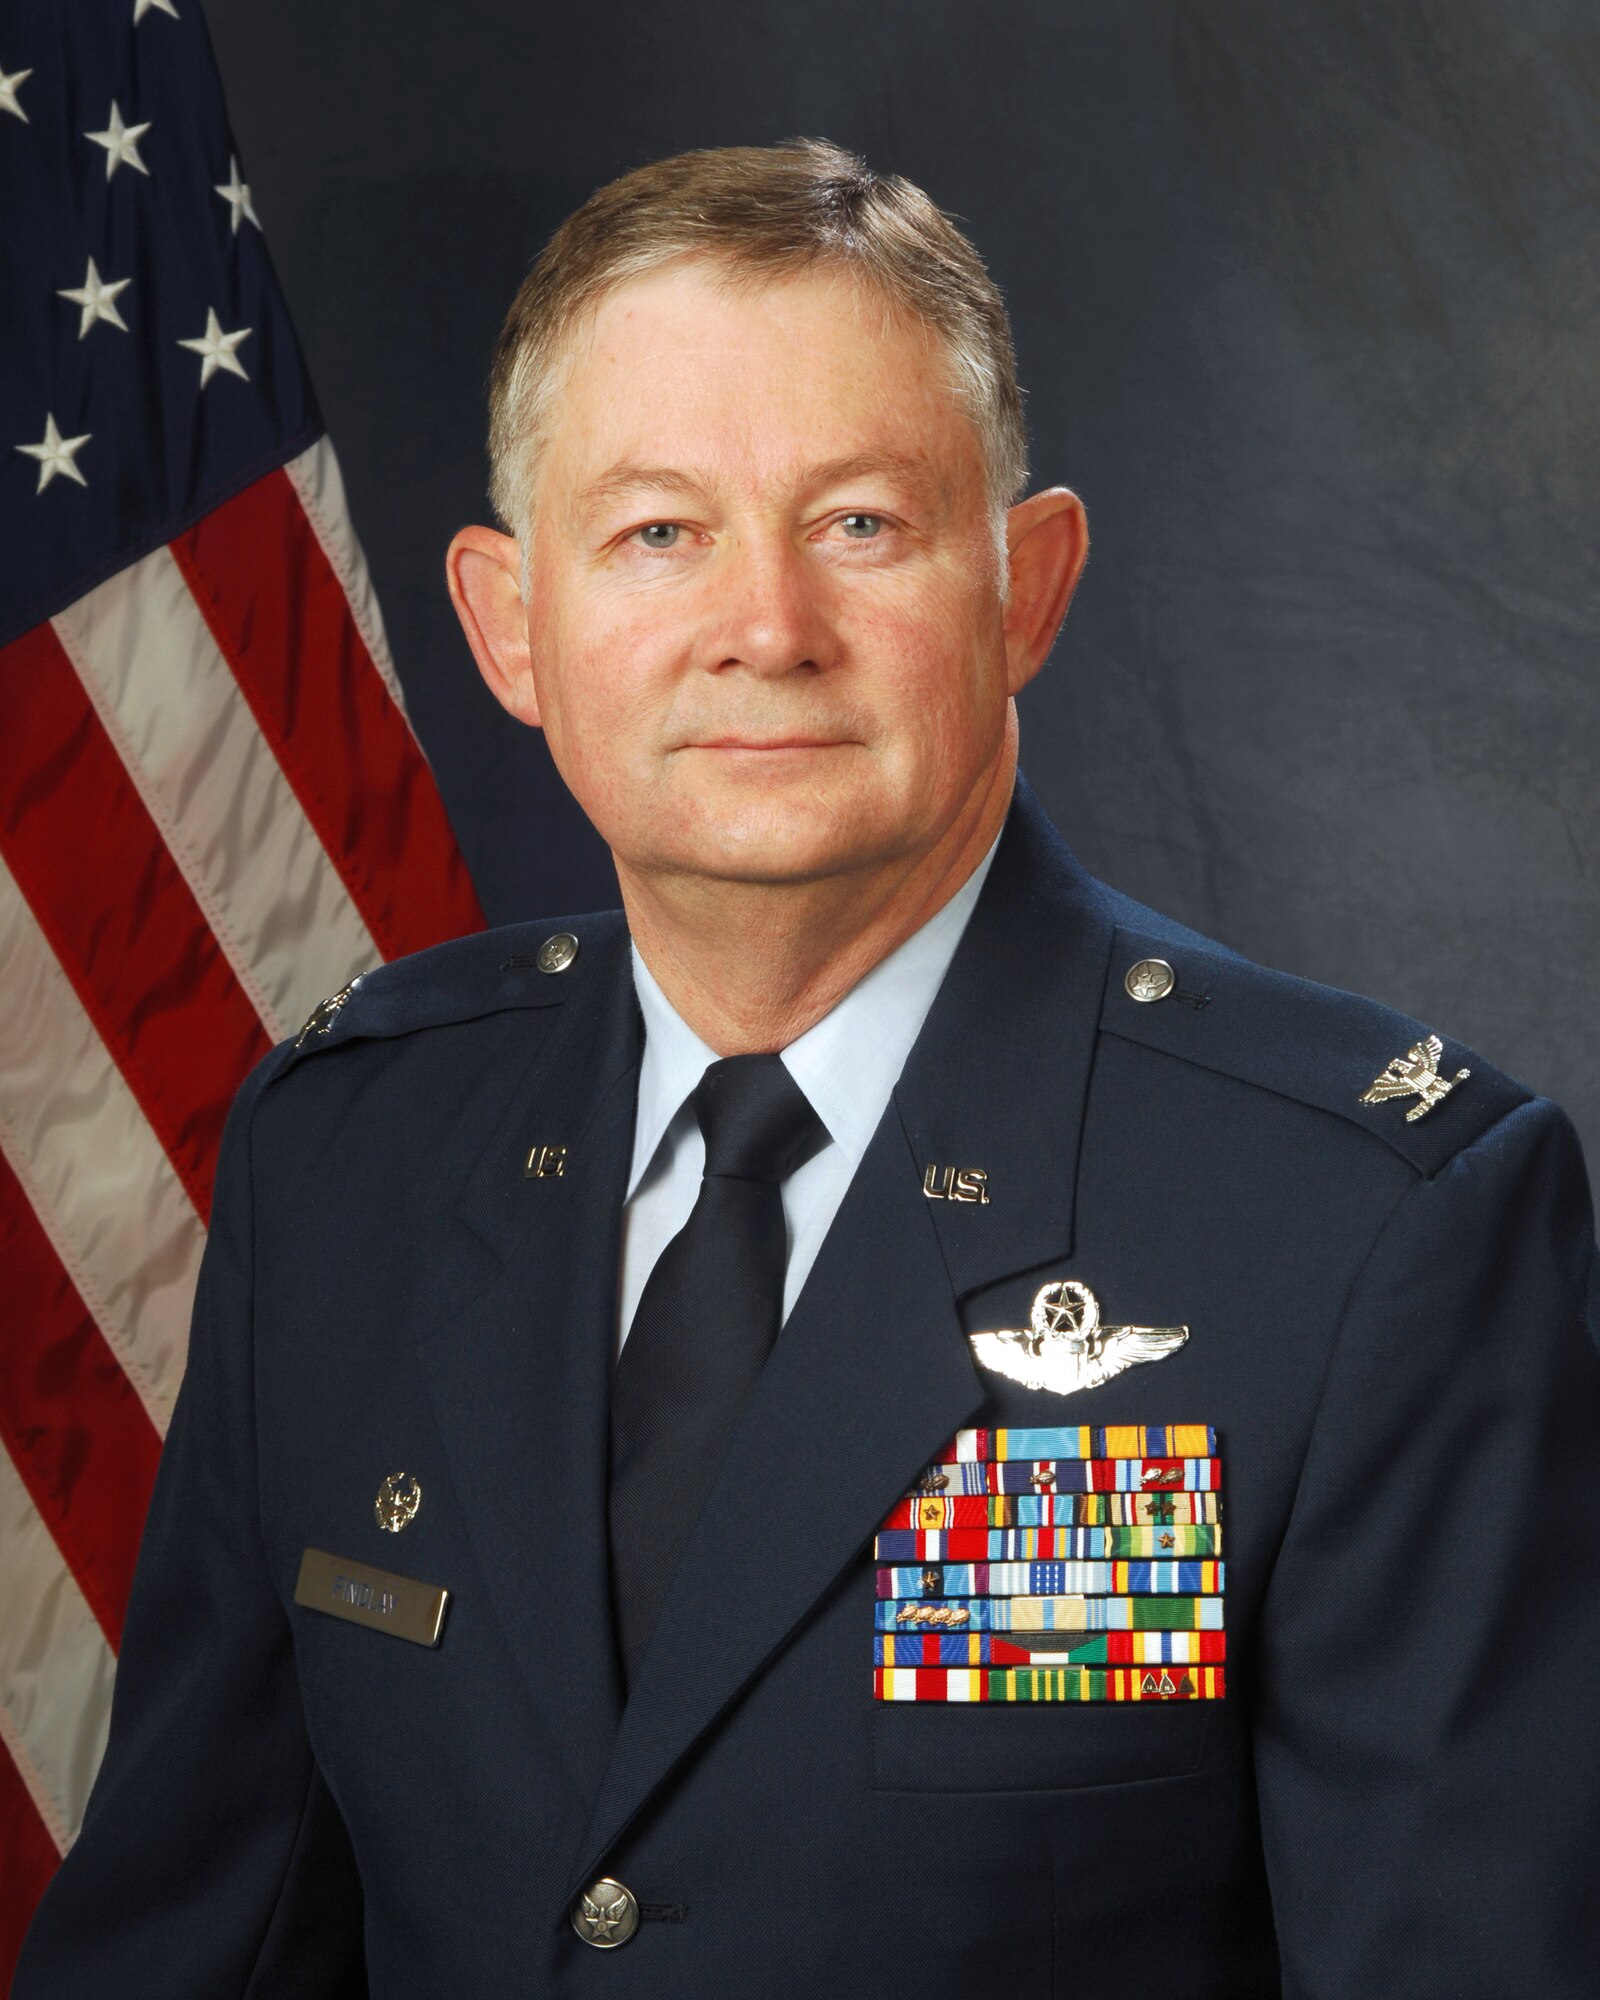 Official photo of Col. Kelvin G. Findlay, 151st Air Refueling wing commander. U.S. Air Force photo by Master Sgt. Burke Baker